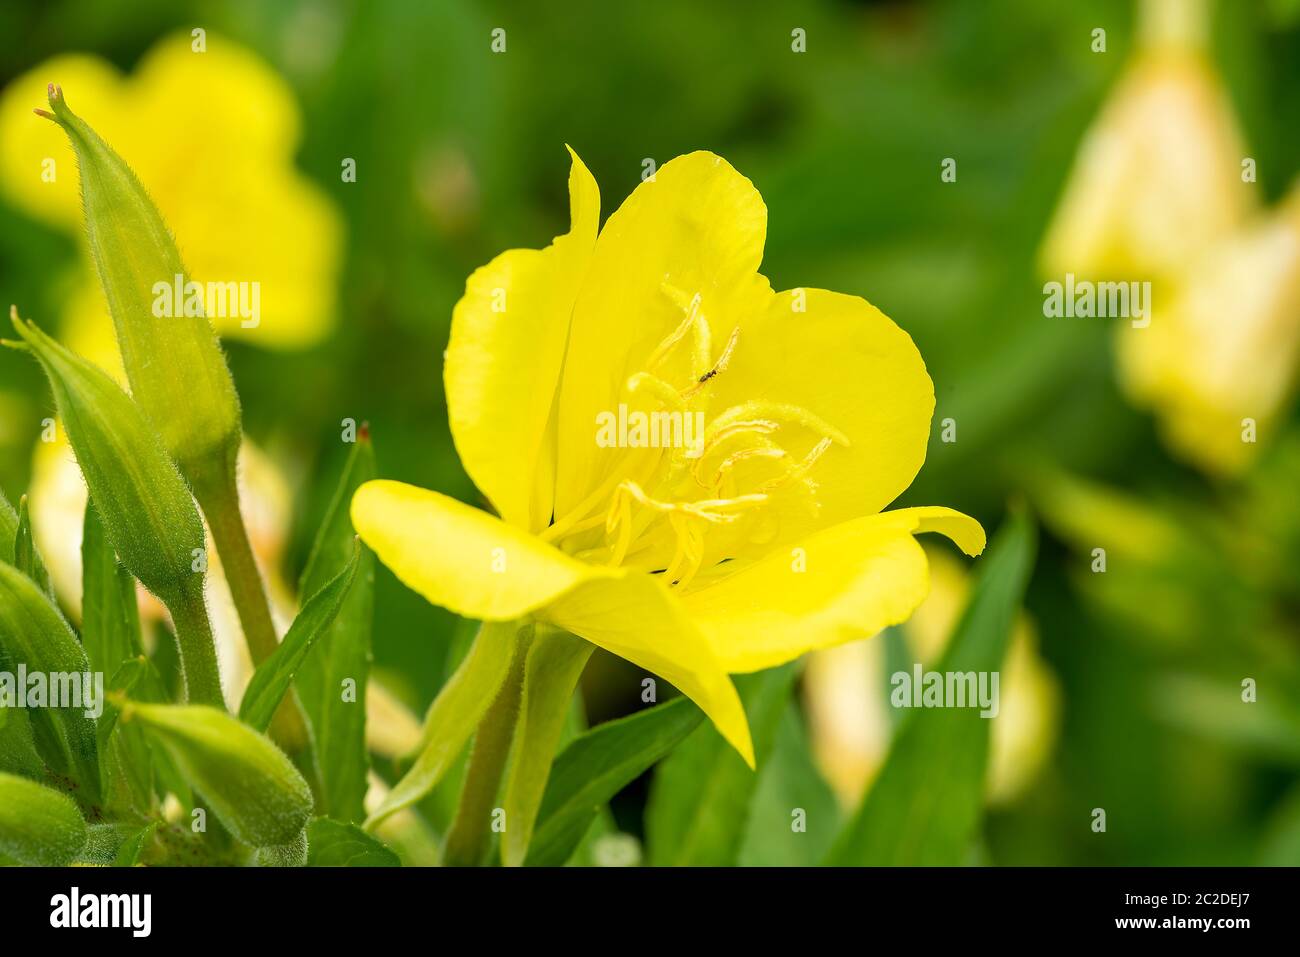 Oenothera odorata a yellow herbaceous springtime summer flower plant commonly known as evening primrose Stock Photo